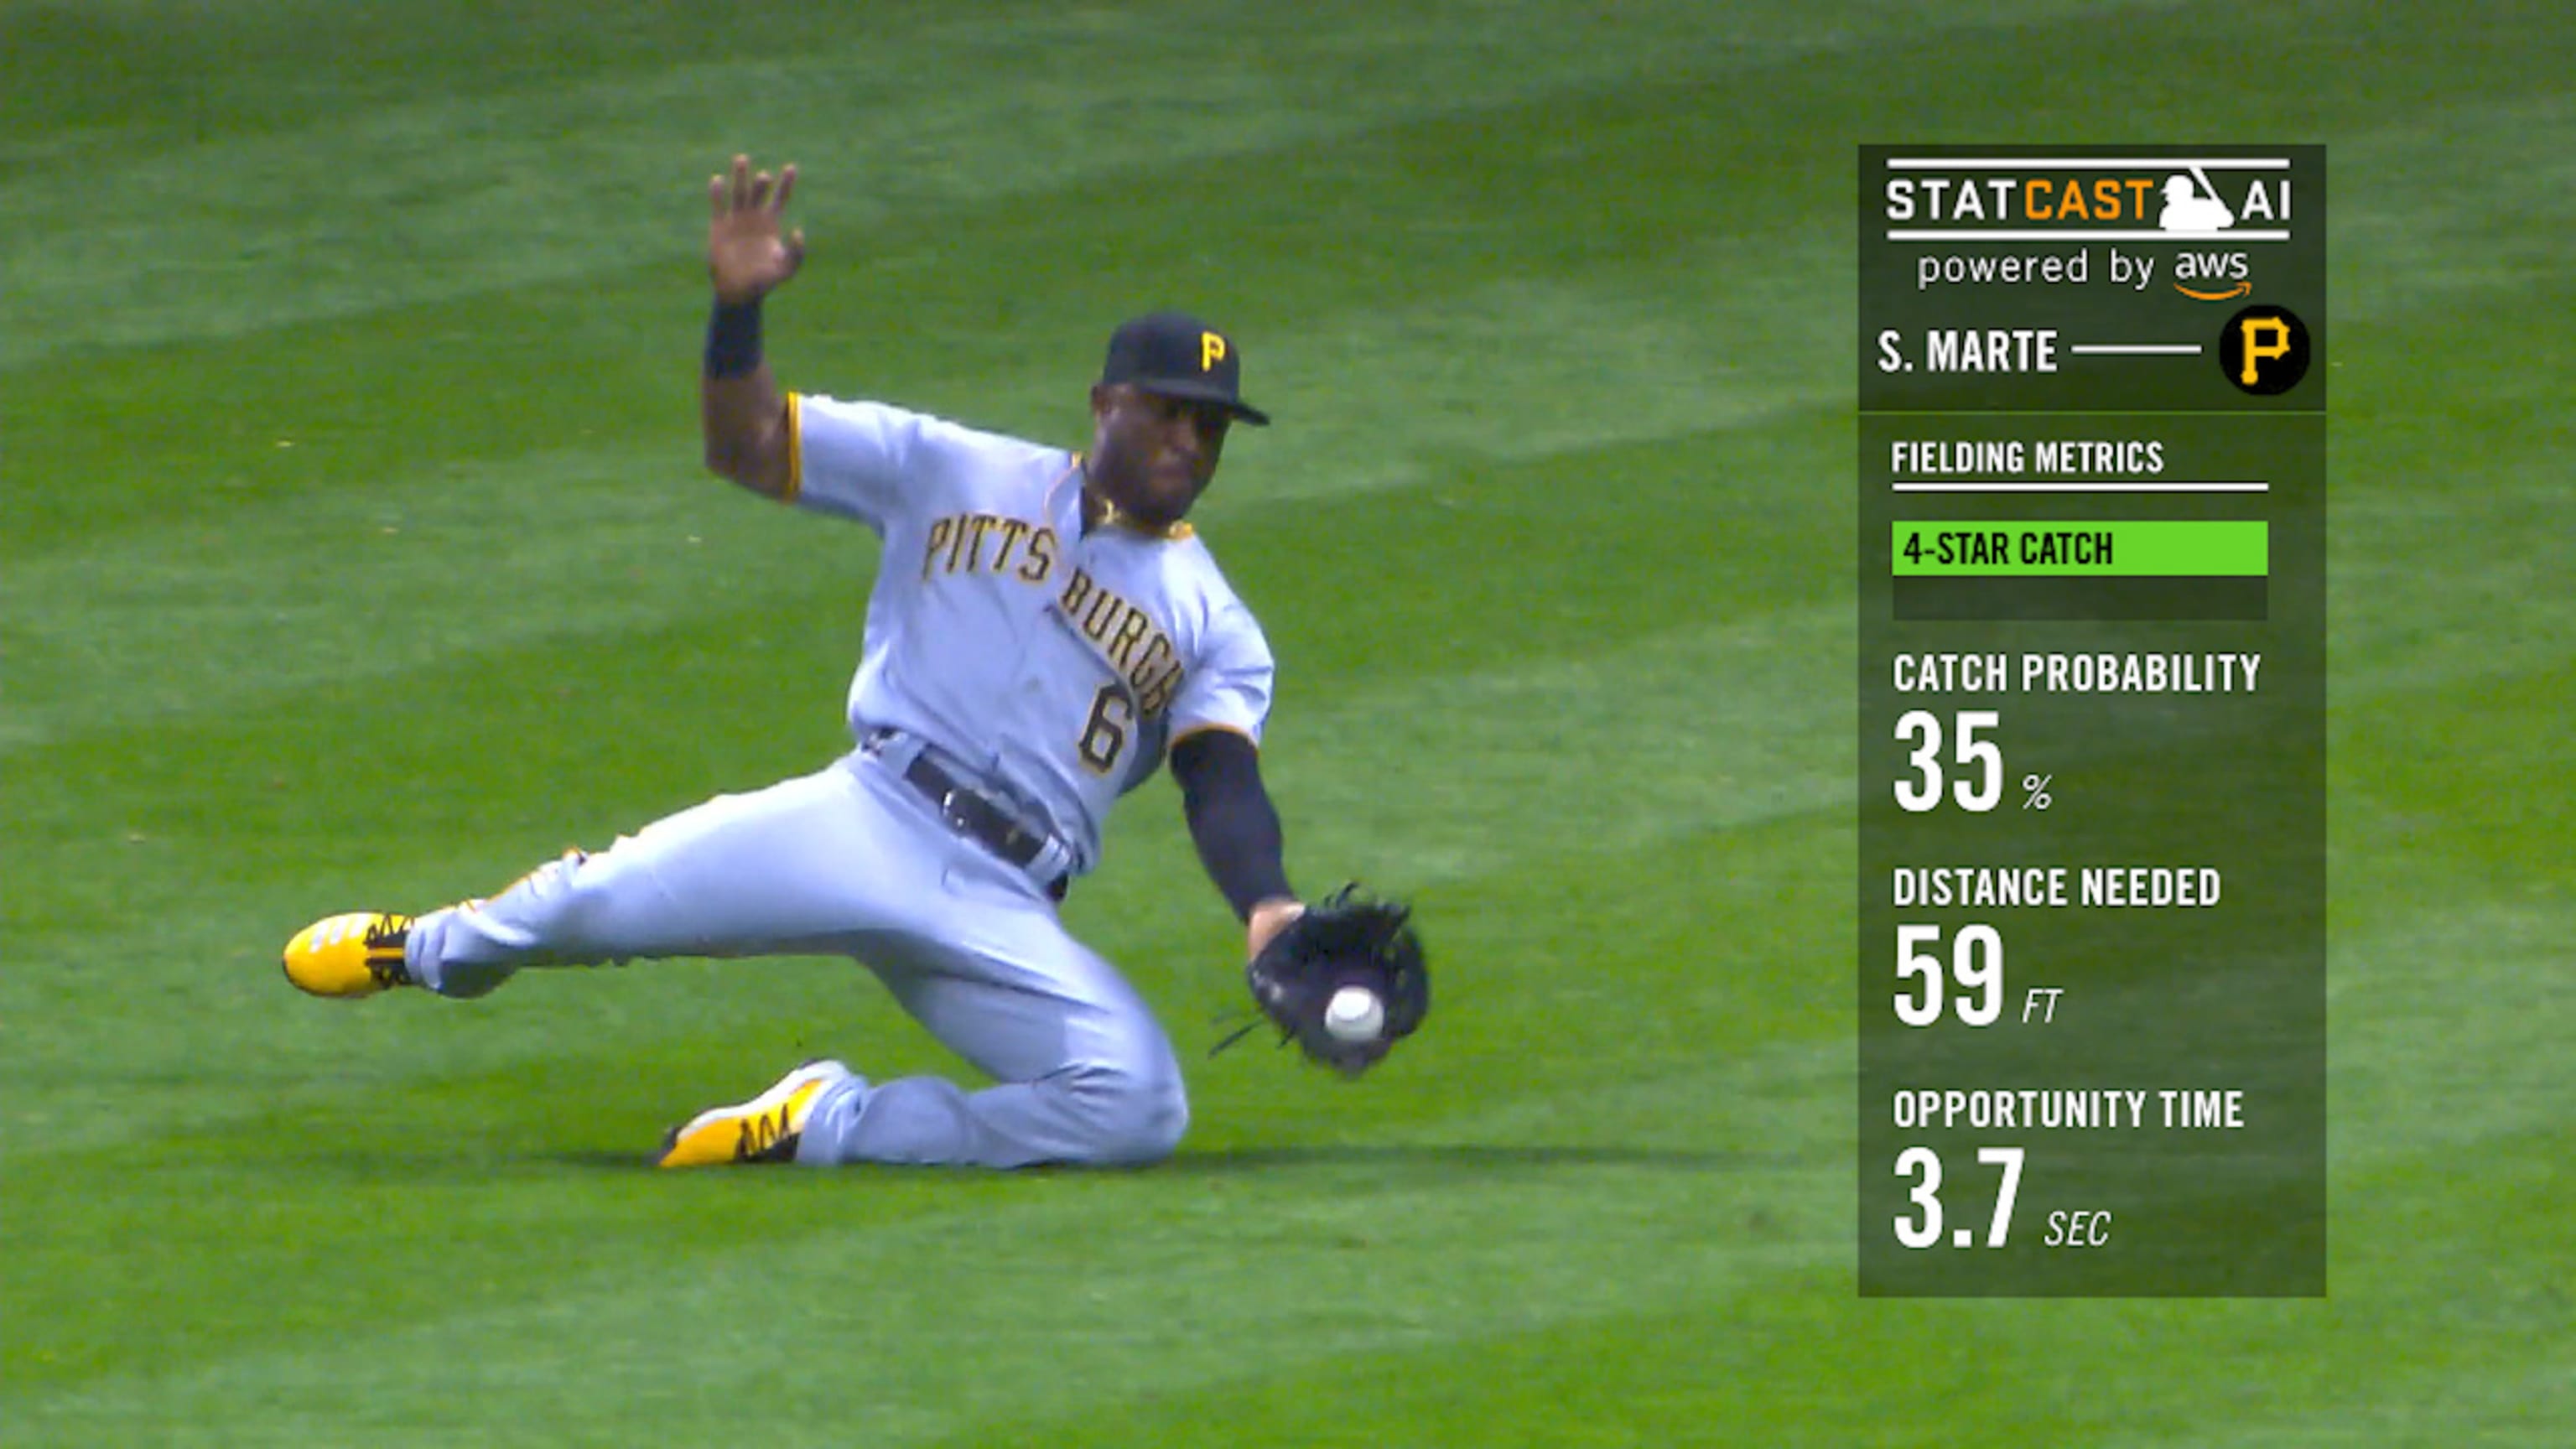 Check out Starling Marte's best moments with the Pirates